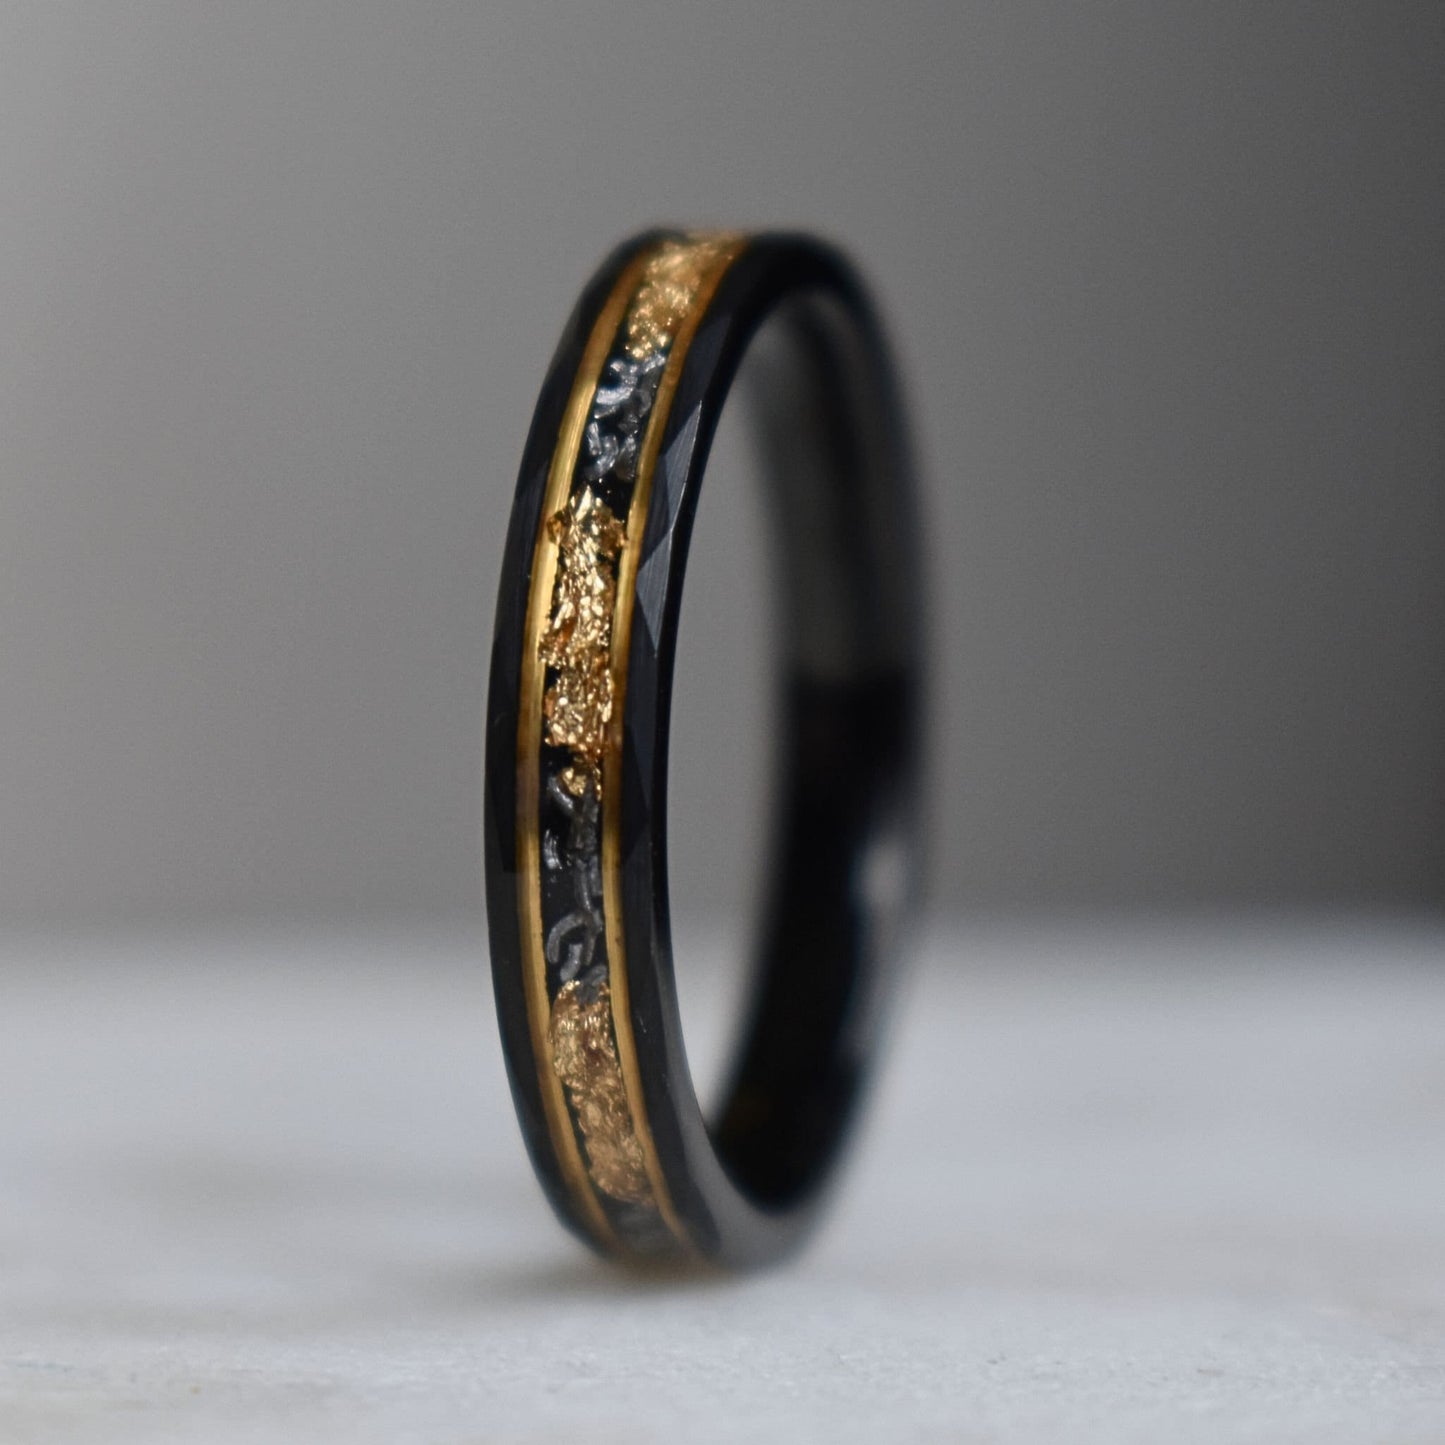 Hammered 4mm Black Tungsten Ring with 22K Gold Leaf and Meteorite Inlay